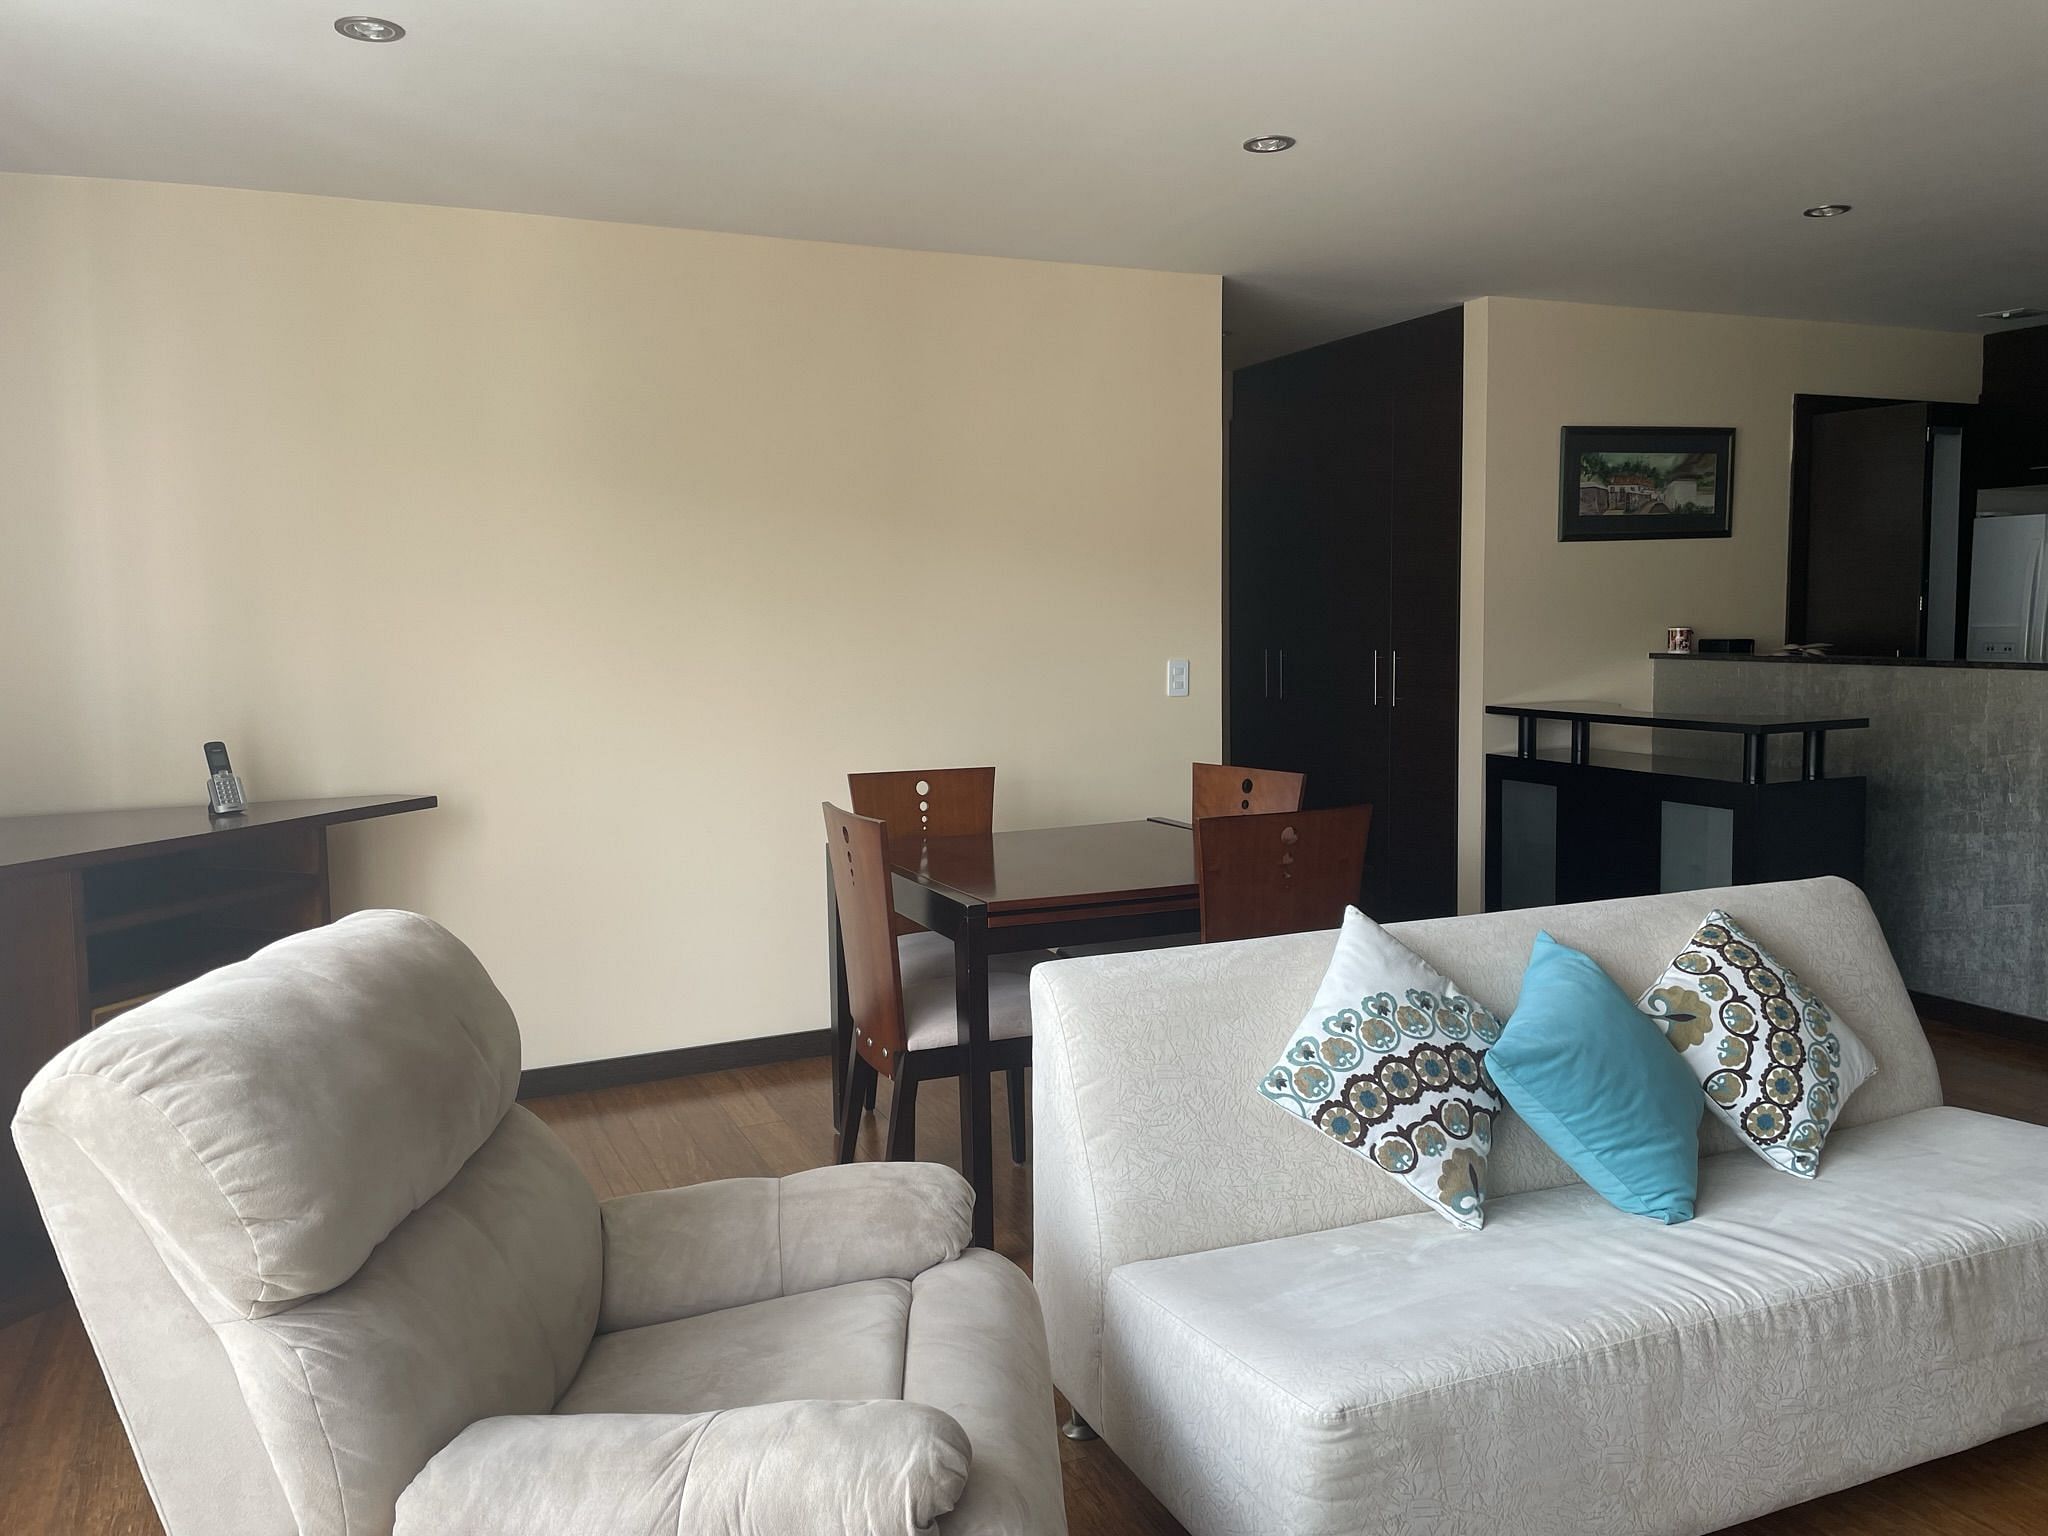 JWguest Apartment at Quito, Pichincha | Comfortable and complete department in Quito | Jwbnb no brobnb 2